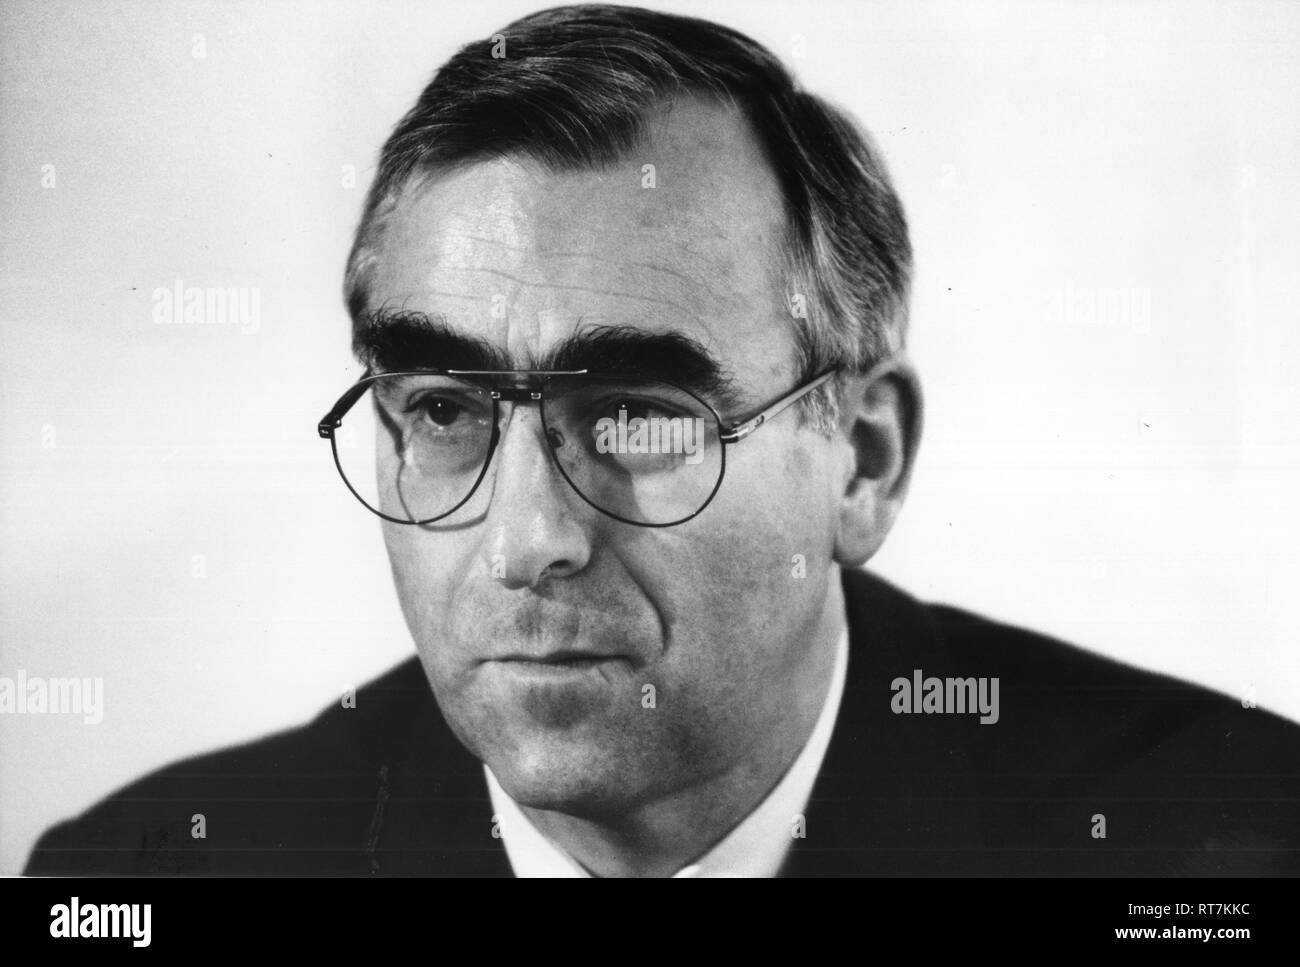 Waigel, Theodor 'Theo', * 22.4.1939, German politician (CSU), portrait, 1983, Additional-Rights-Clearance-Info-Not-Available Stock Photo